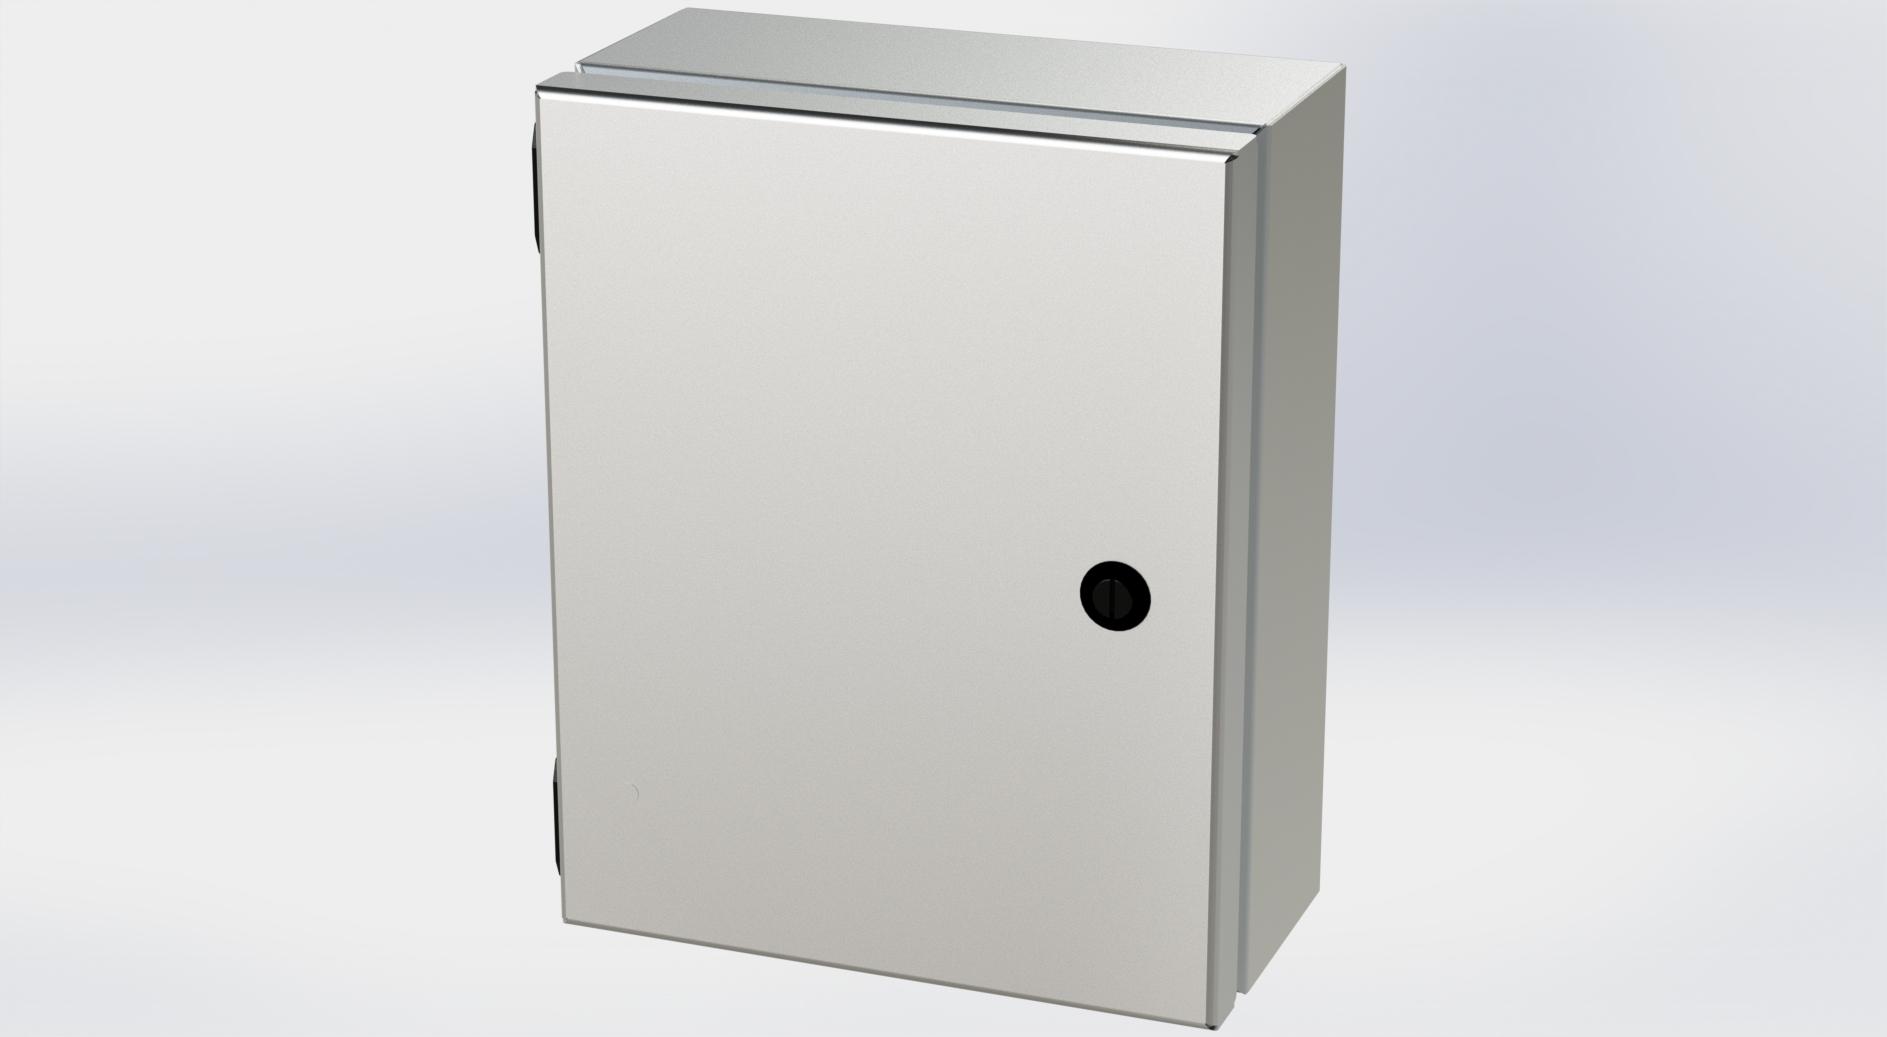 Saginaw Control SCE-1008ELJSS S.S. ELJ Enclosure, Height:10.00", Width:8.00", Depth:4.00", #4 brushed finish on all exterior surfaces. Optional sub-panels are powder coated white.